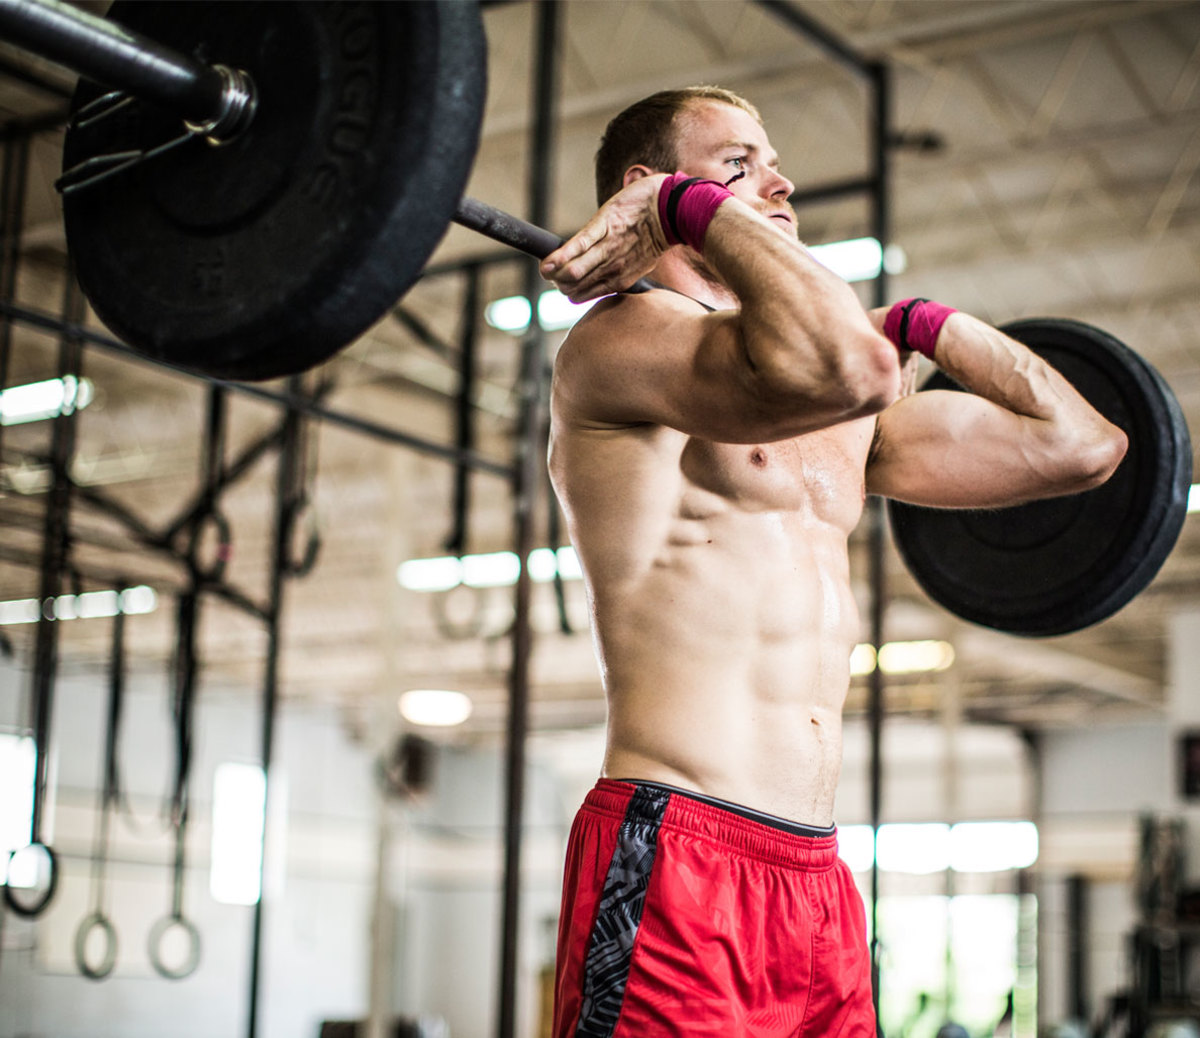 The Science Behind Repetitive Movement: Why Low Weights, High Reps